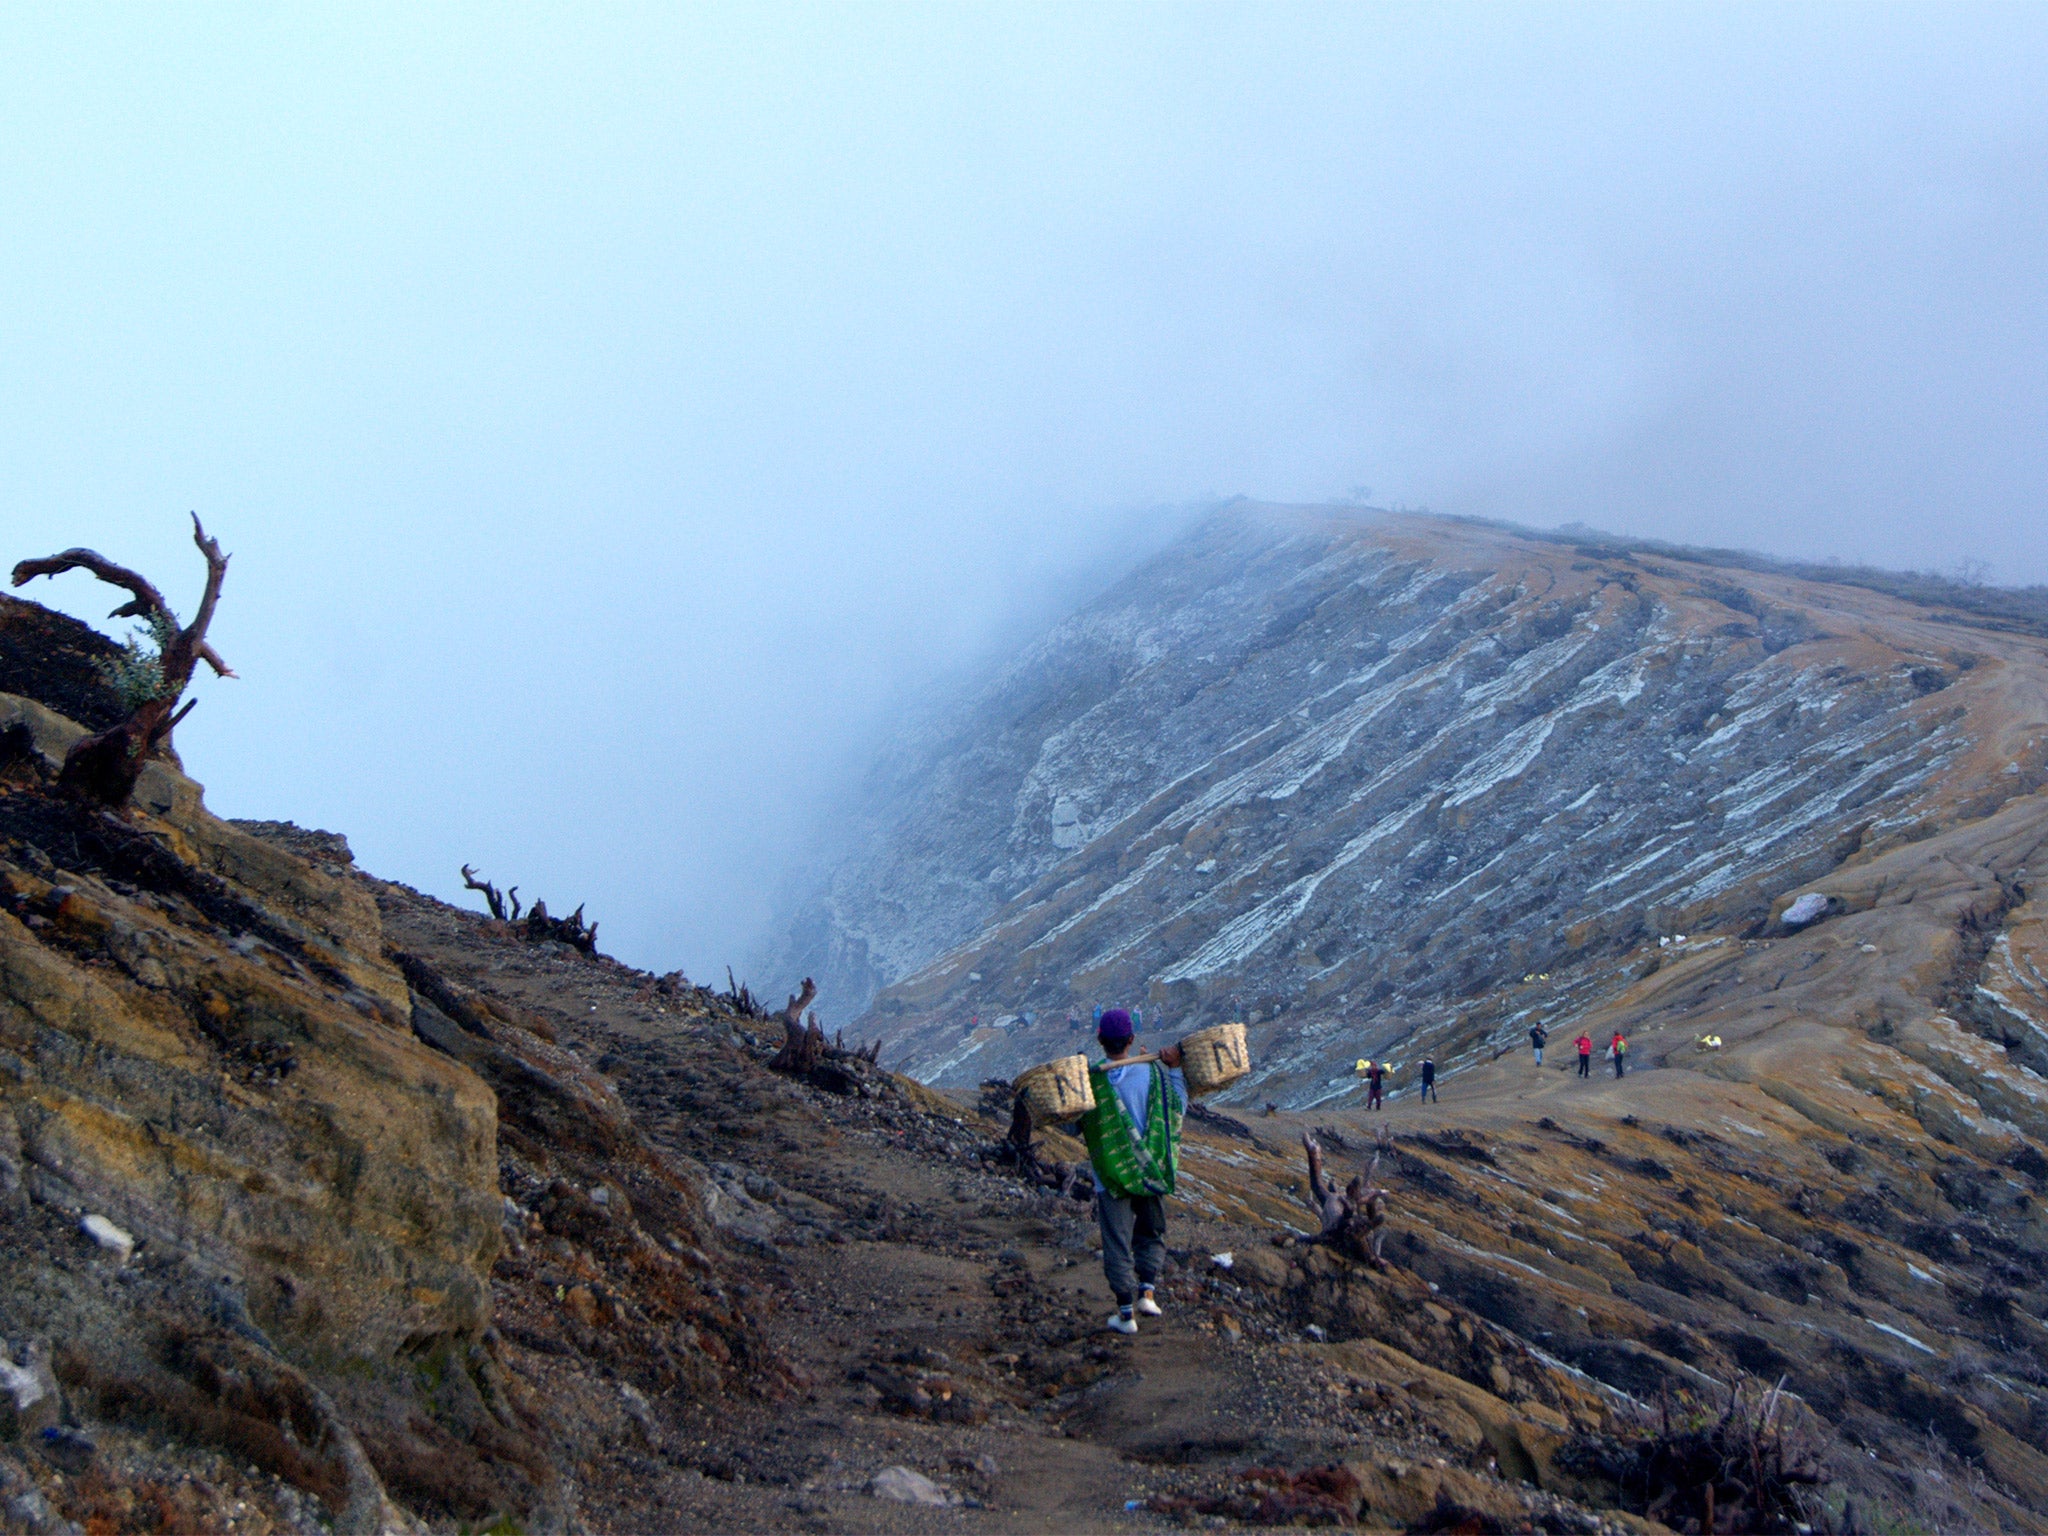 Dig deep: sulphur miners at the rim of the Ijen volcano